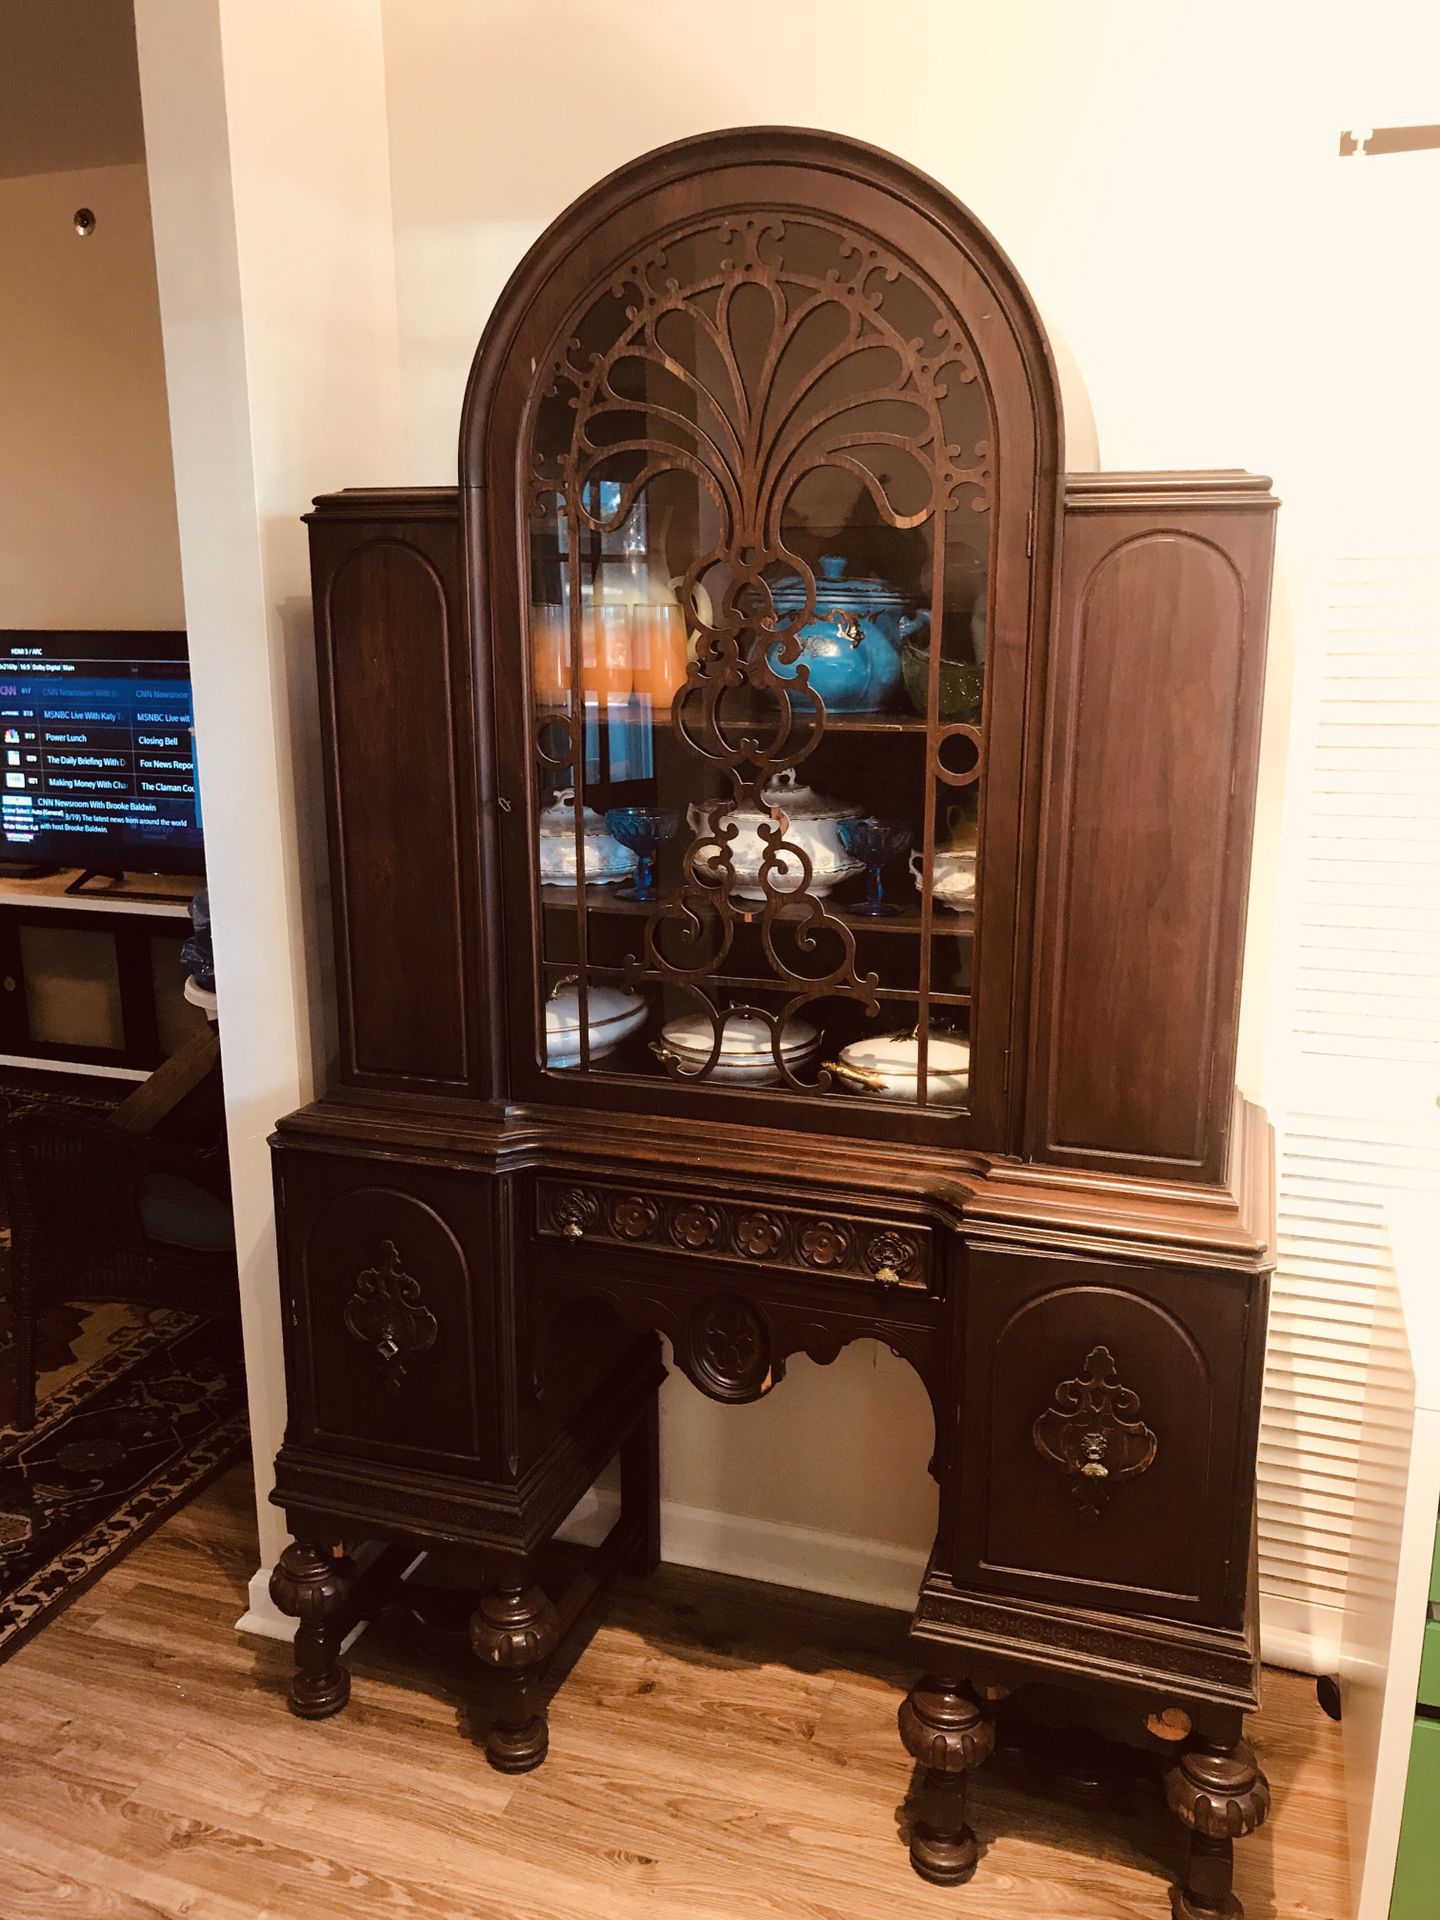 Rare Antique Jacobean English Style Walnut Hutch China Cabinet Early 1900's (moving out of state)